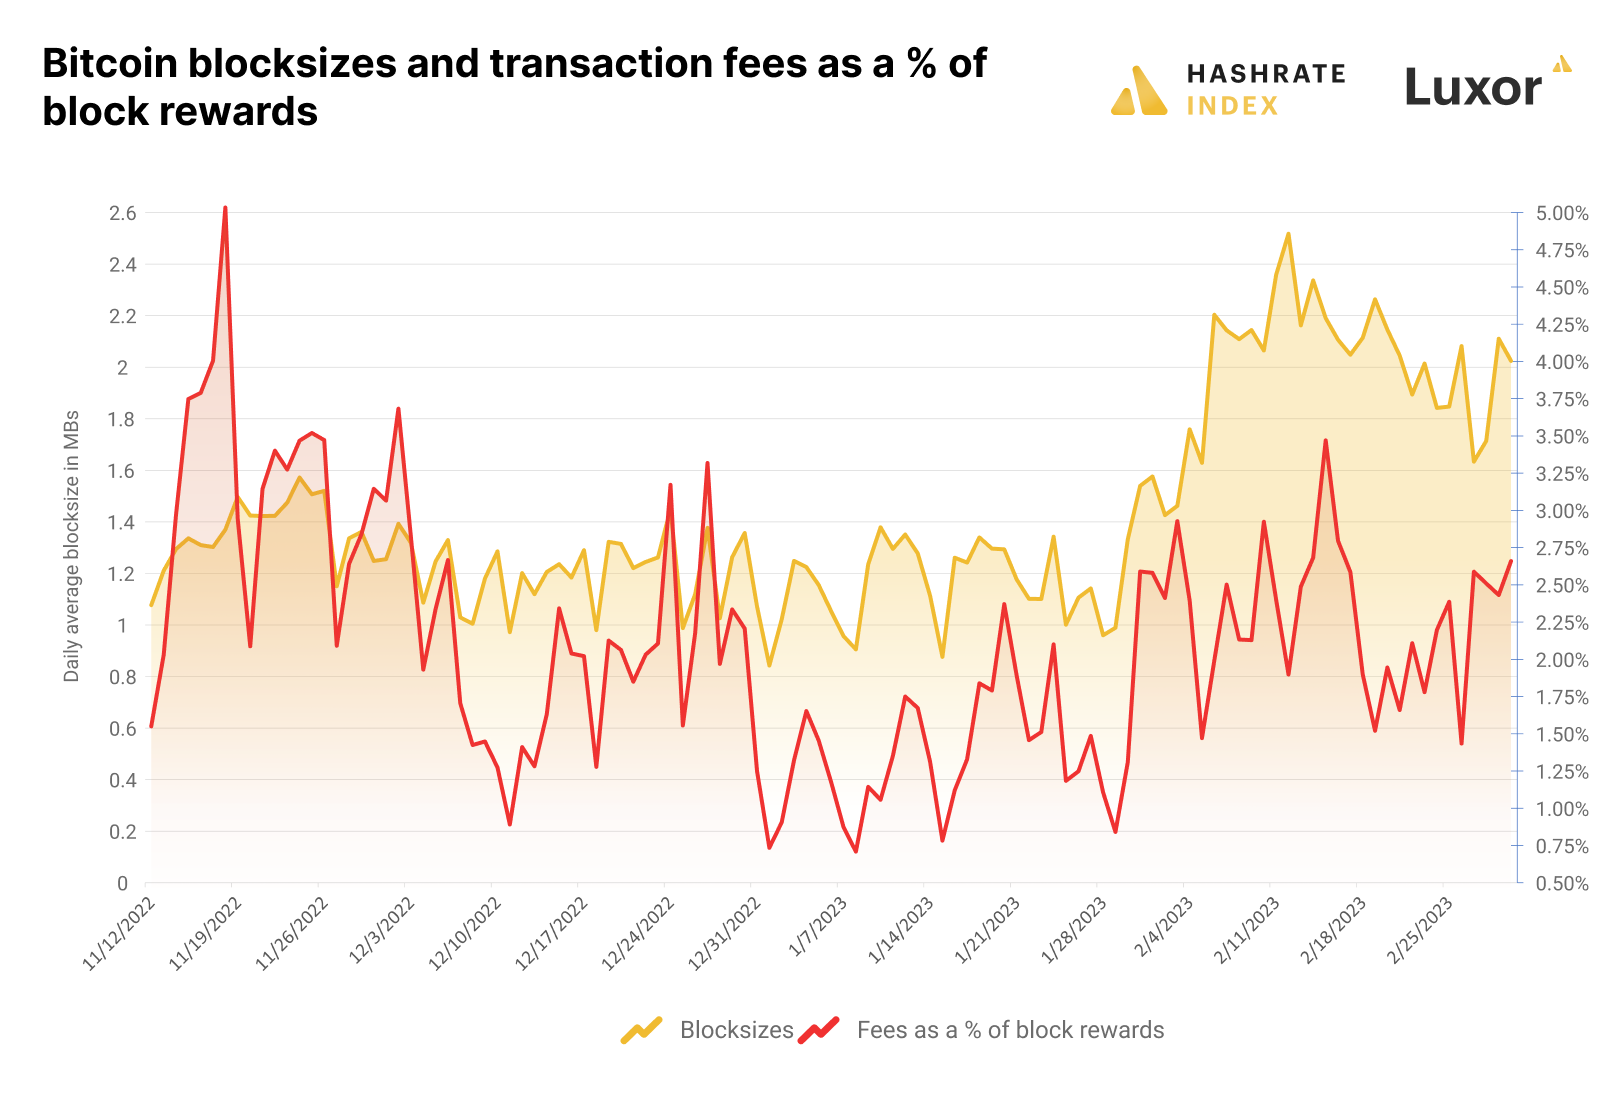 Bitcoin blocksizes and fees as a % of block rewards | Source: Hashrate Index